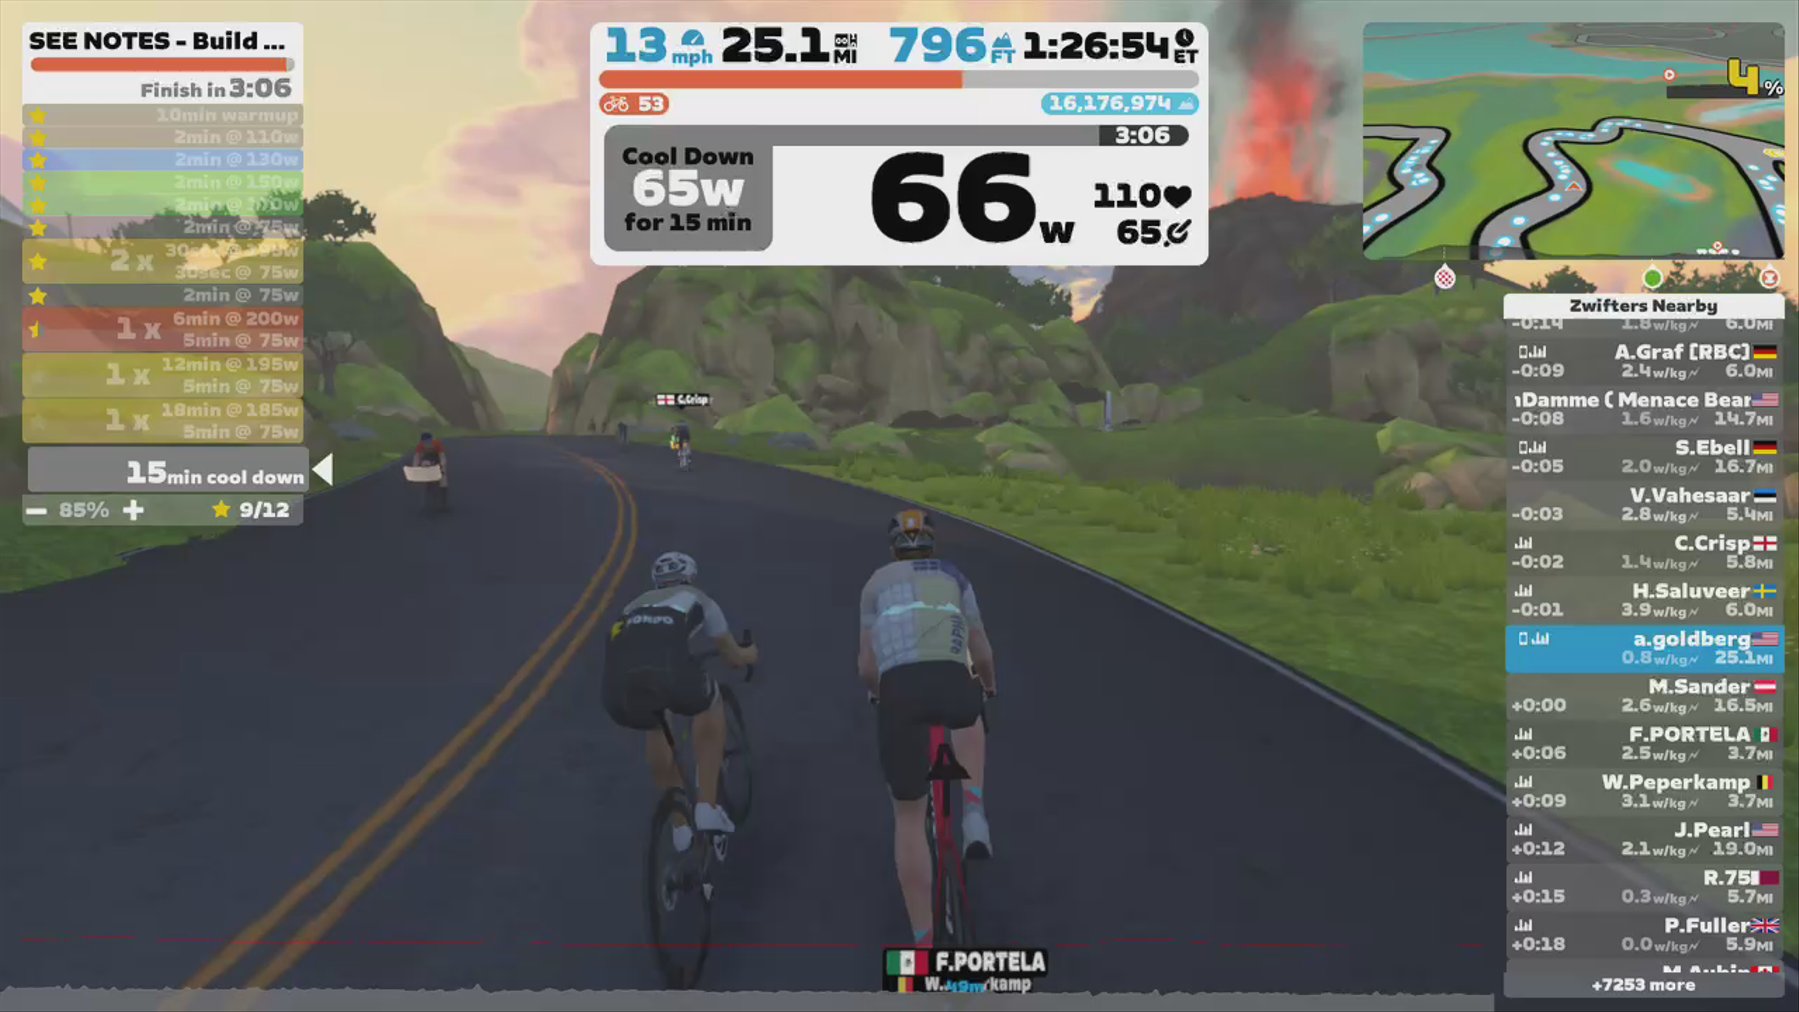 Zwift - SEE NOTES - Build Ramp 6, 12, 18 mins in Watopia